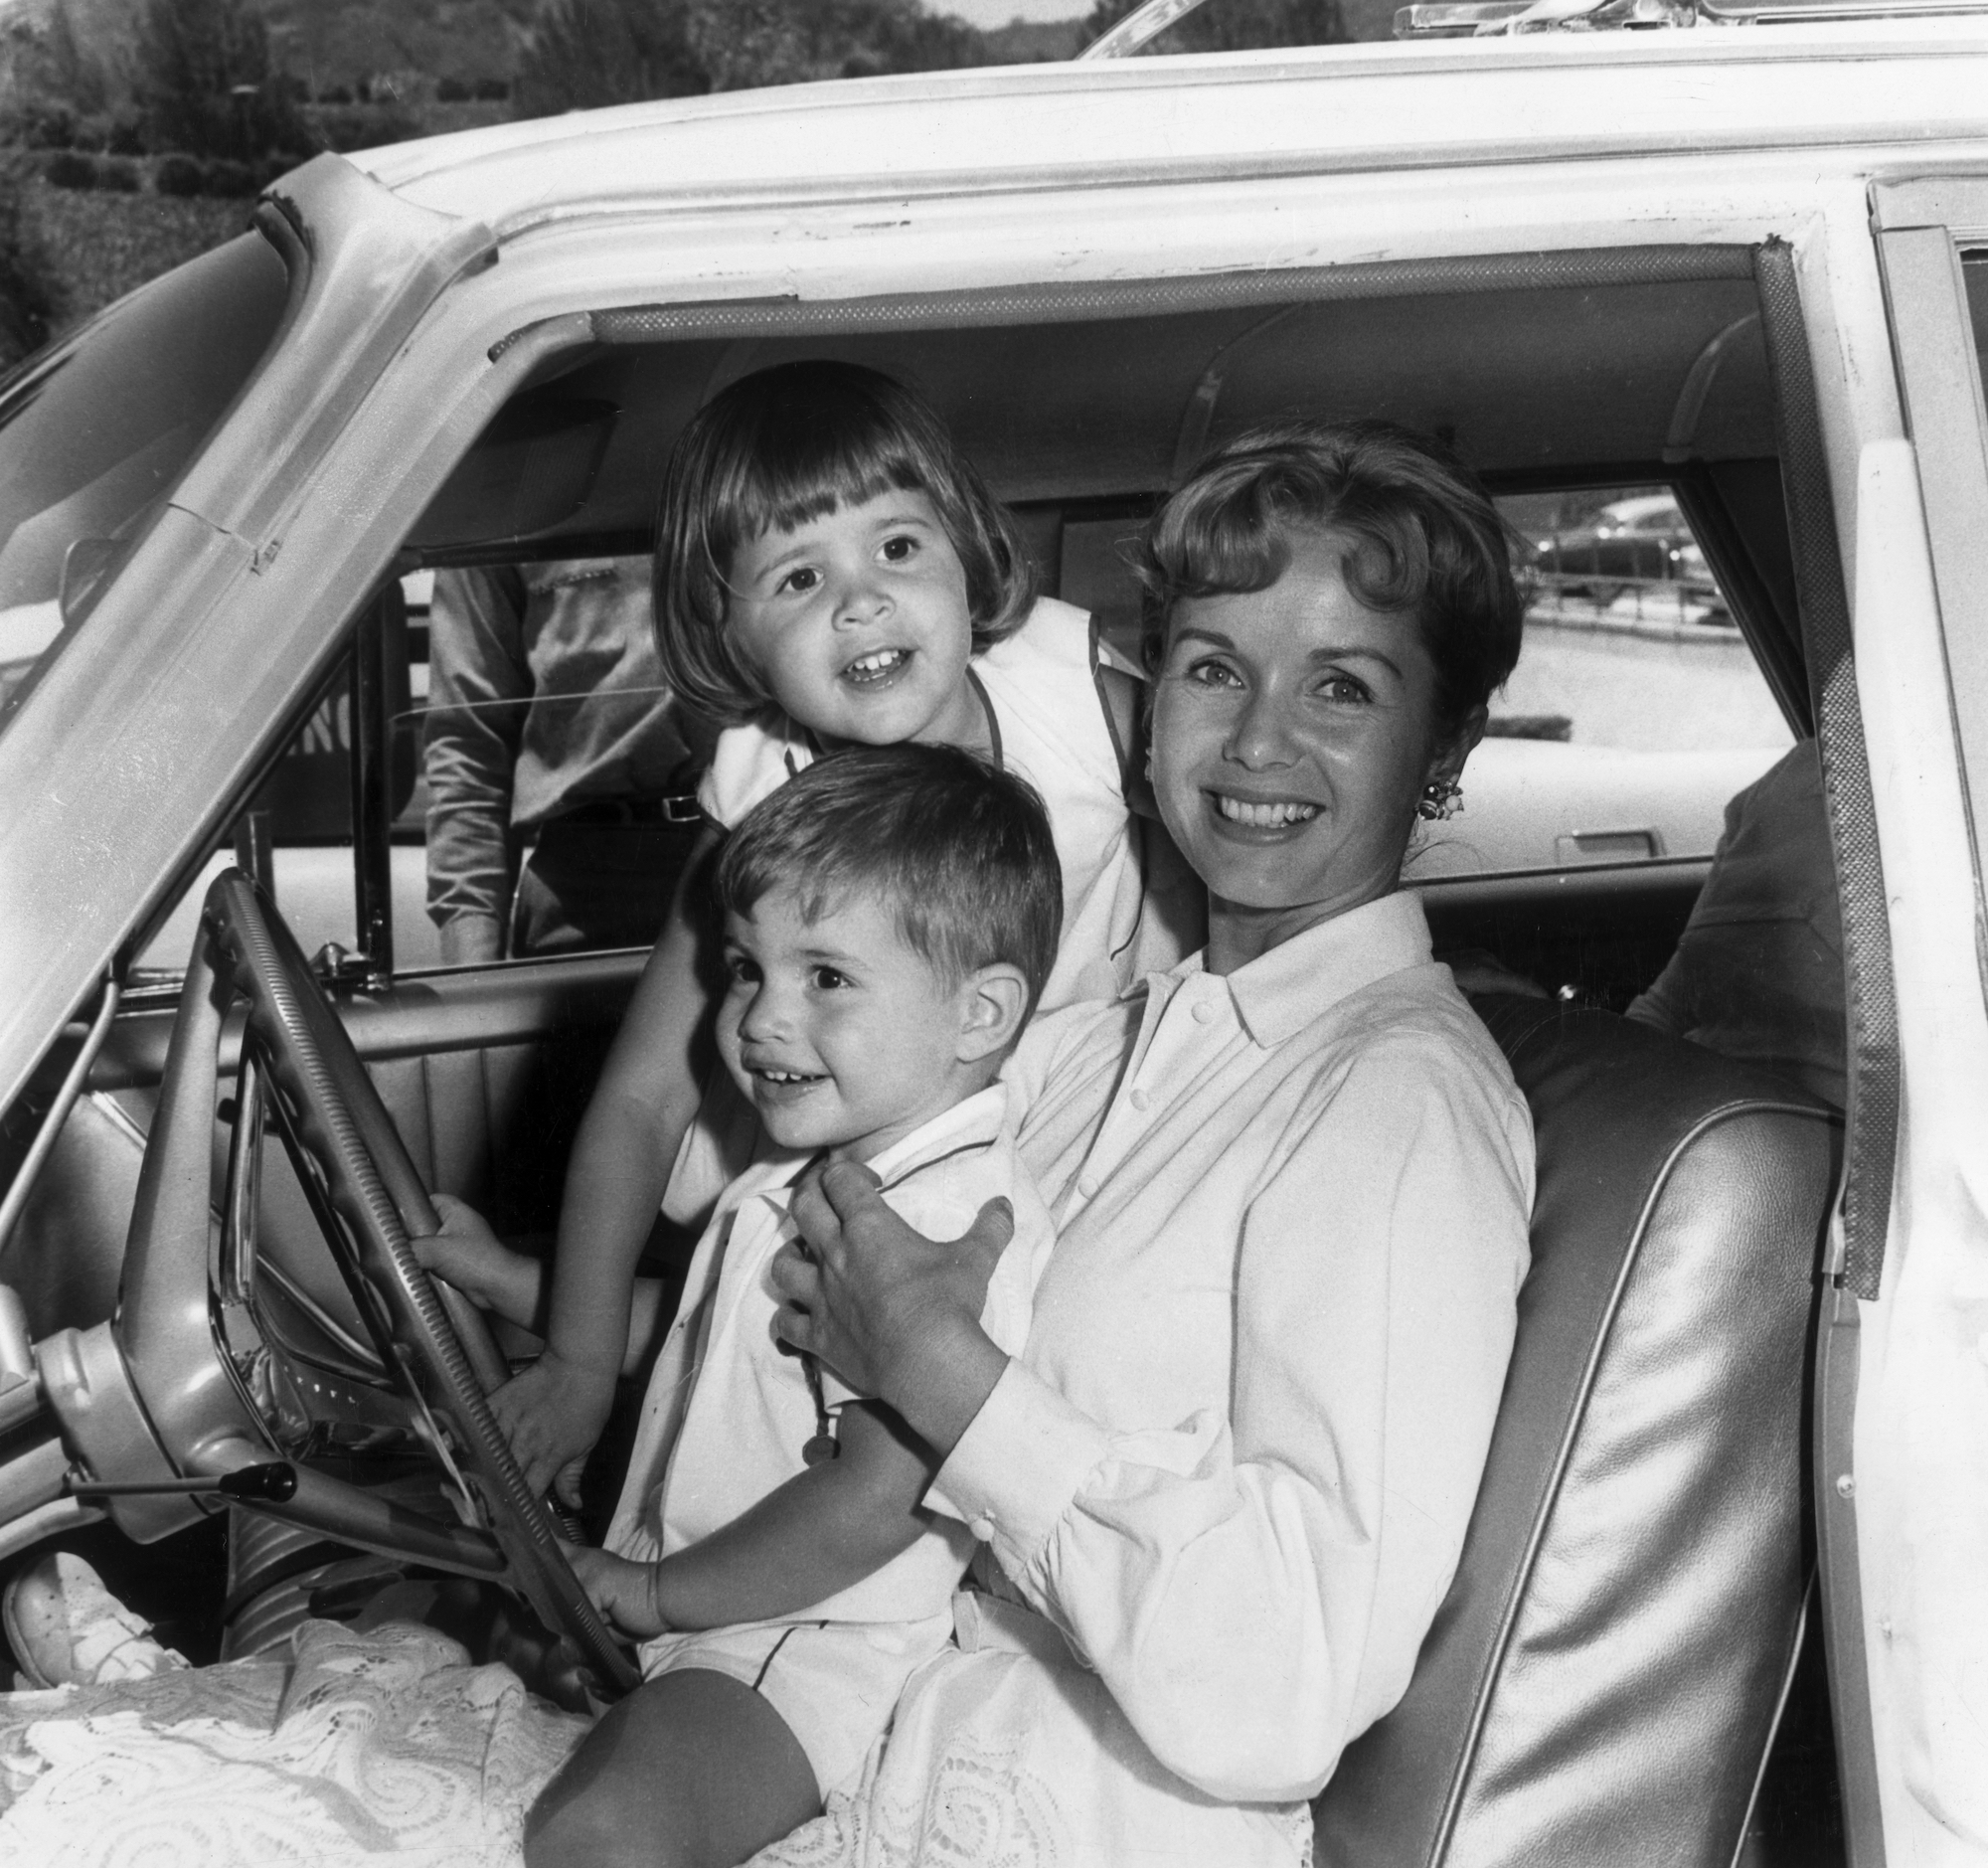 Carrie Fisher, Todd Fisher, and Debbie Reynolds